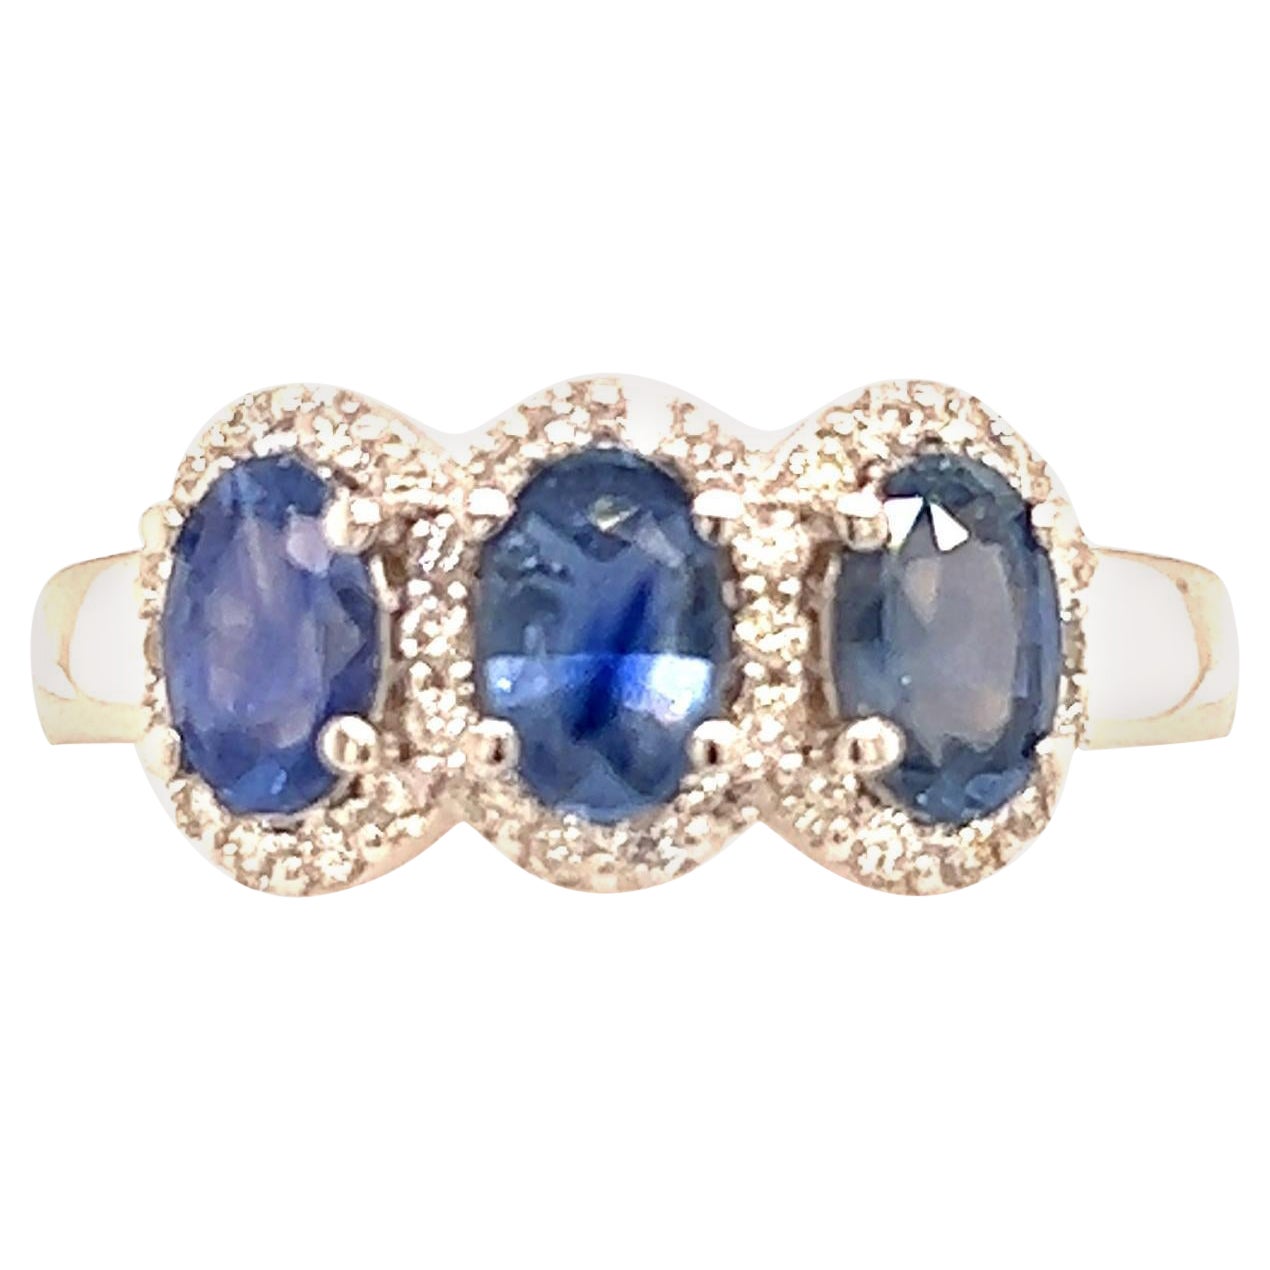 Natural Sapphire Diamond Ring 7 14k W Gold 1.67 TCW Certified For Sale